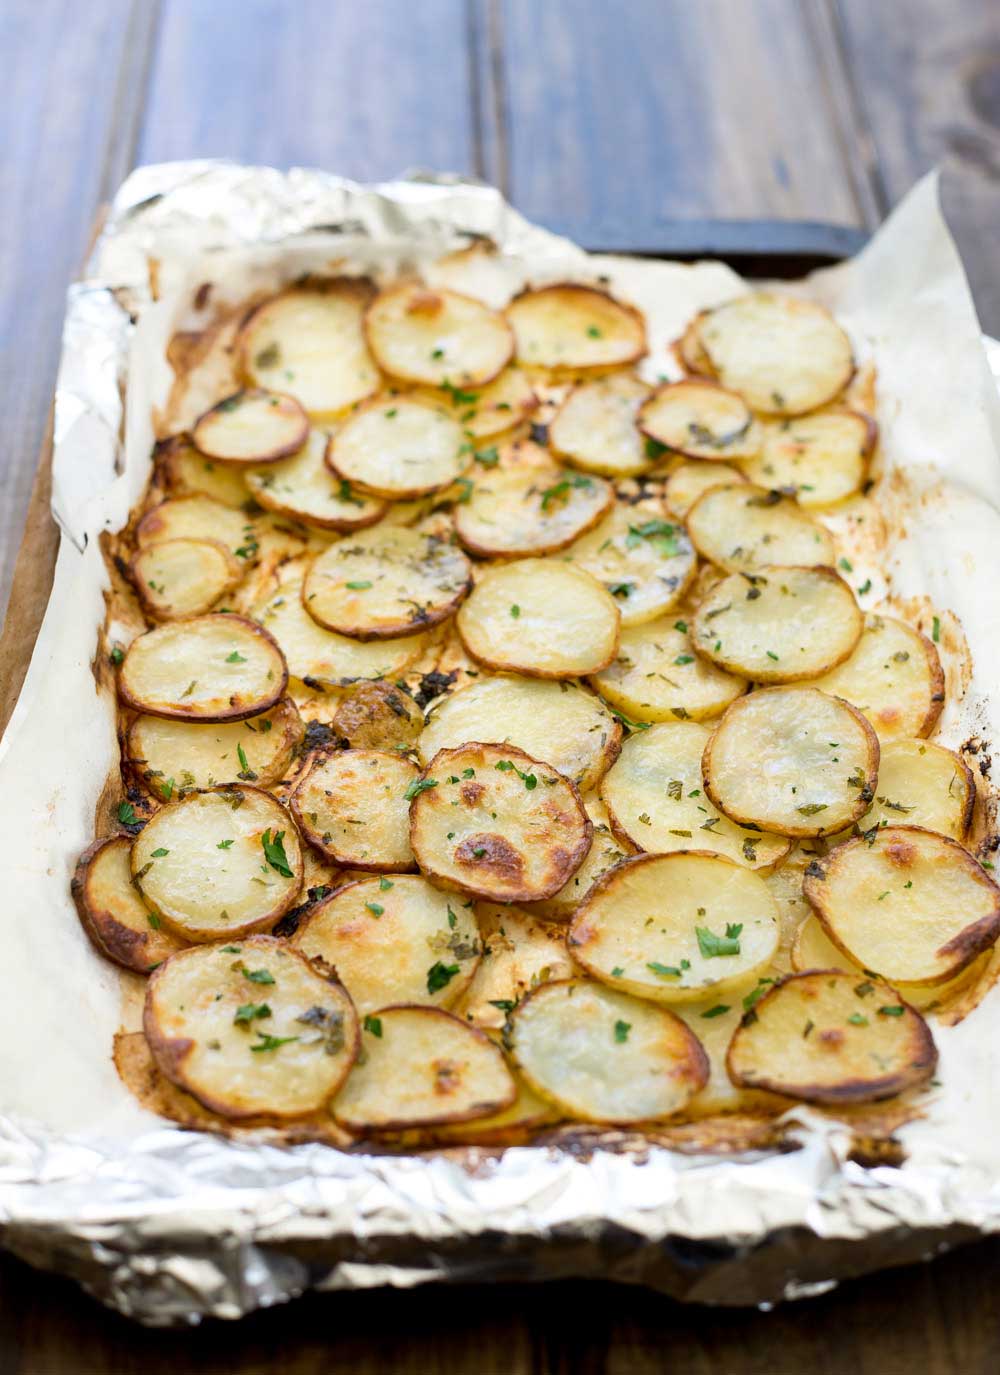 Delicious disks of potato, roasted until they are golden brown and soft inside. Sprinkled with salt, pepper and fresh parsley these are the perfect side or appetiser | Sprinkles and Sprouts